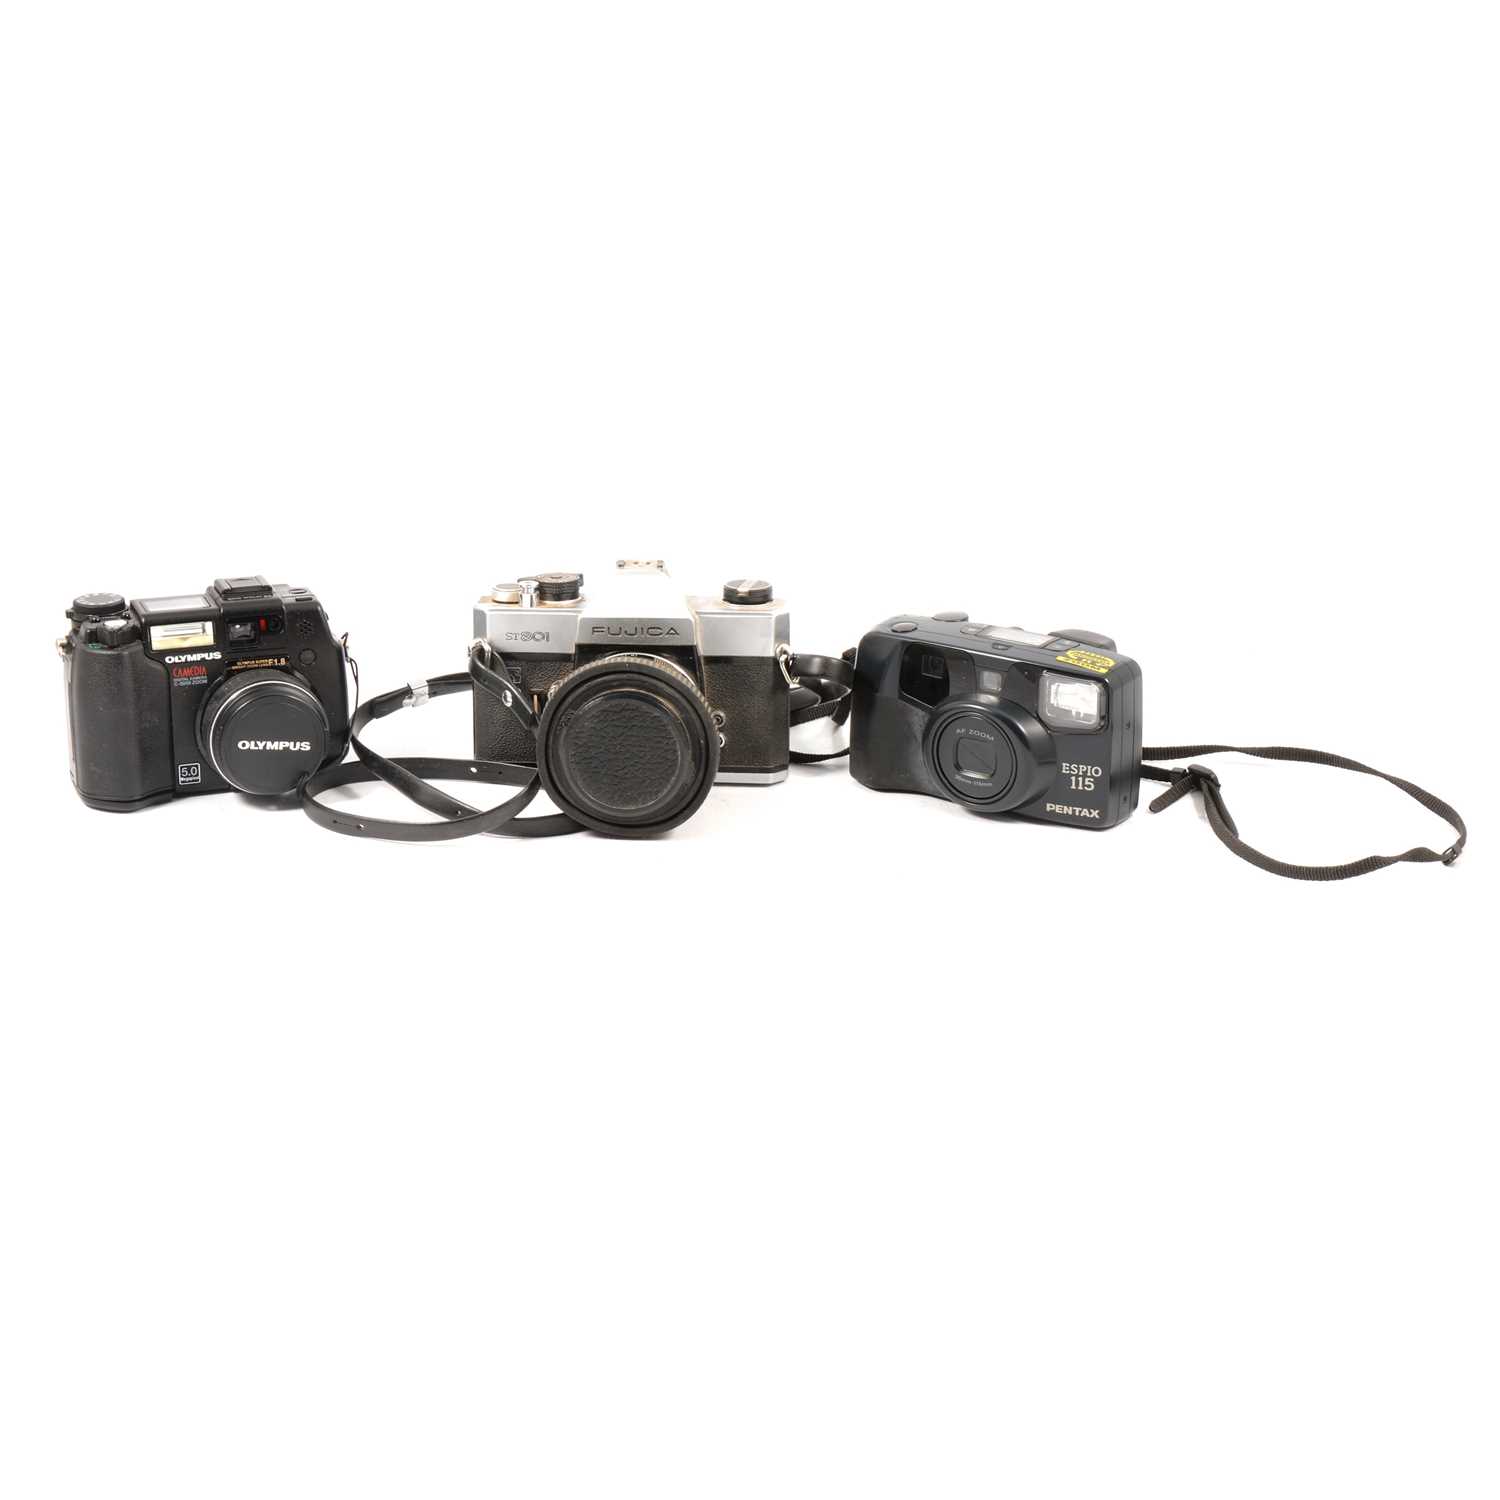 Lot 157 - Collection of vintage SLR and digital cameras, one box.